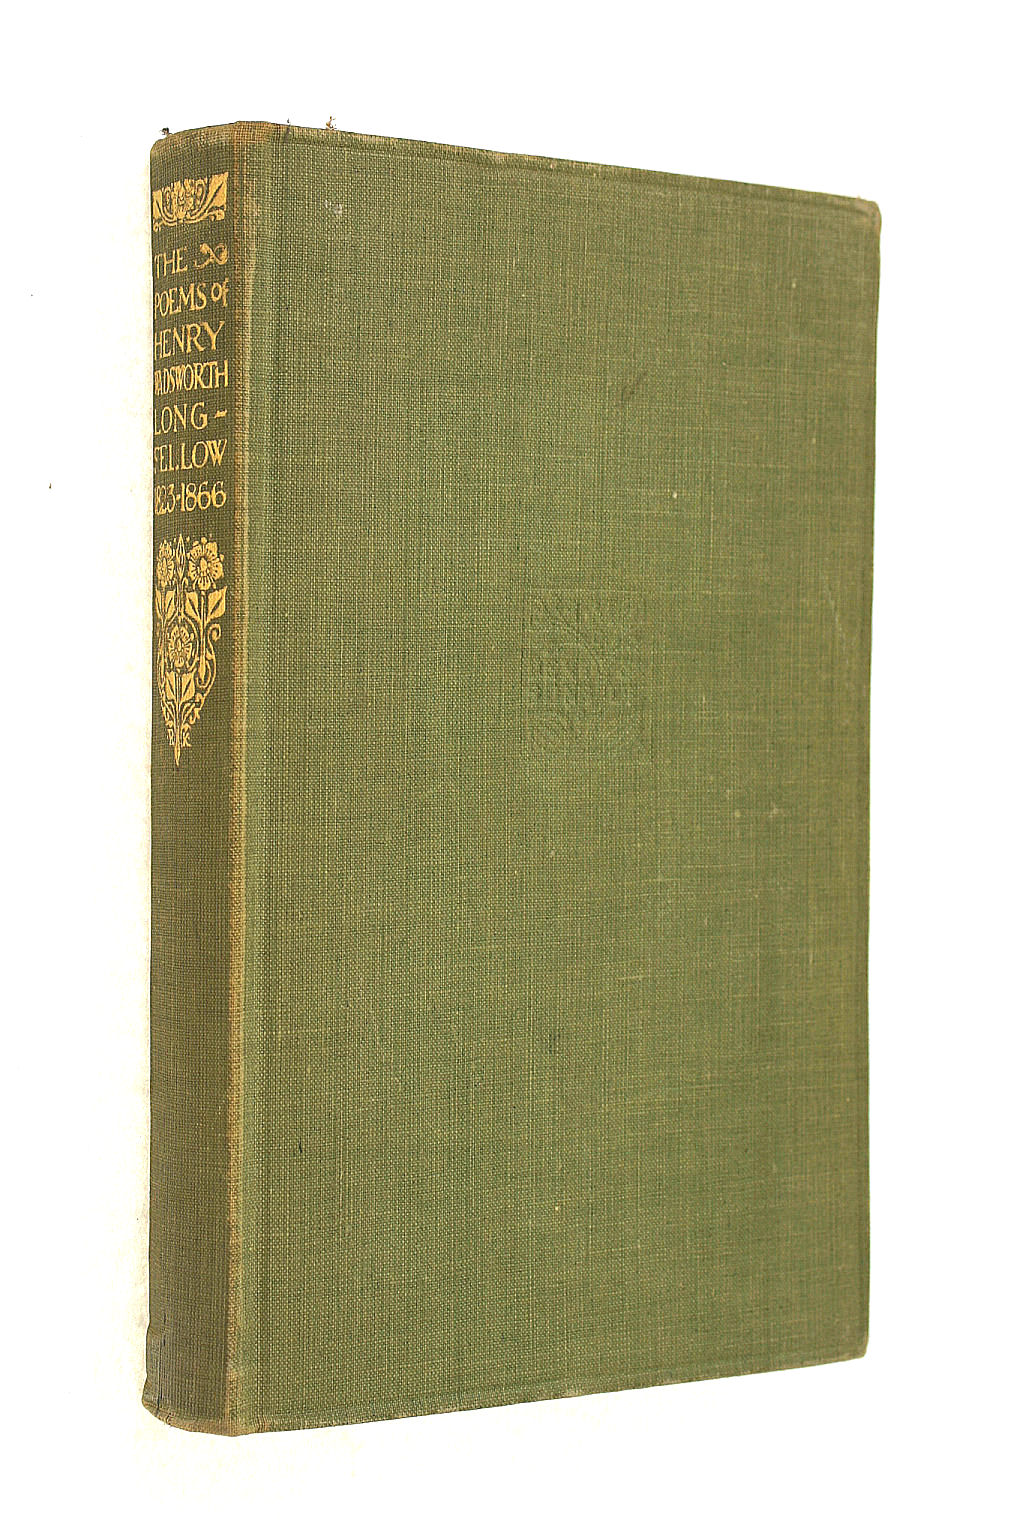 LONGFELLOW, HENRY WADSWORTH - Poems by Longfellow, Henry Wadsworth